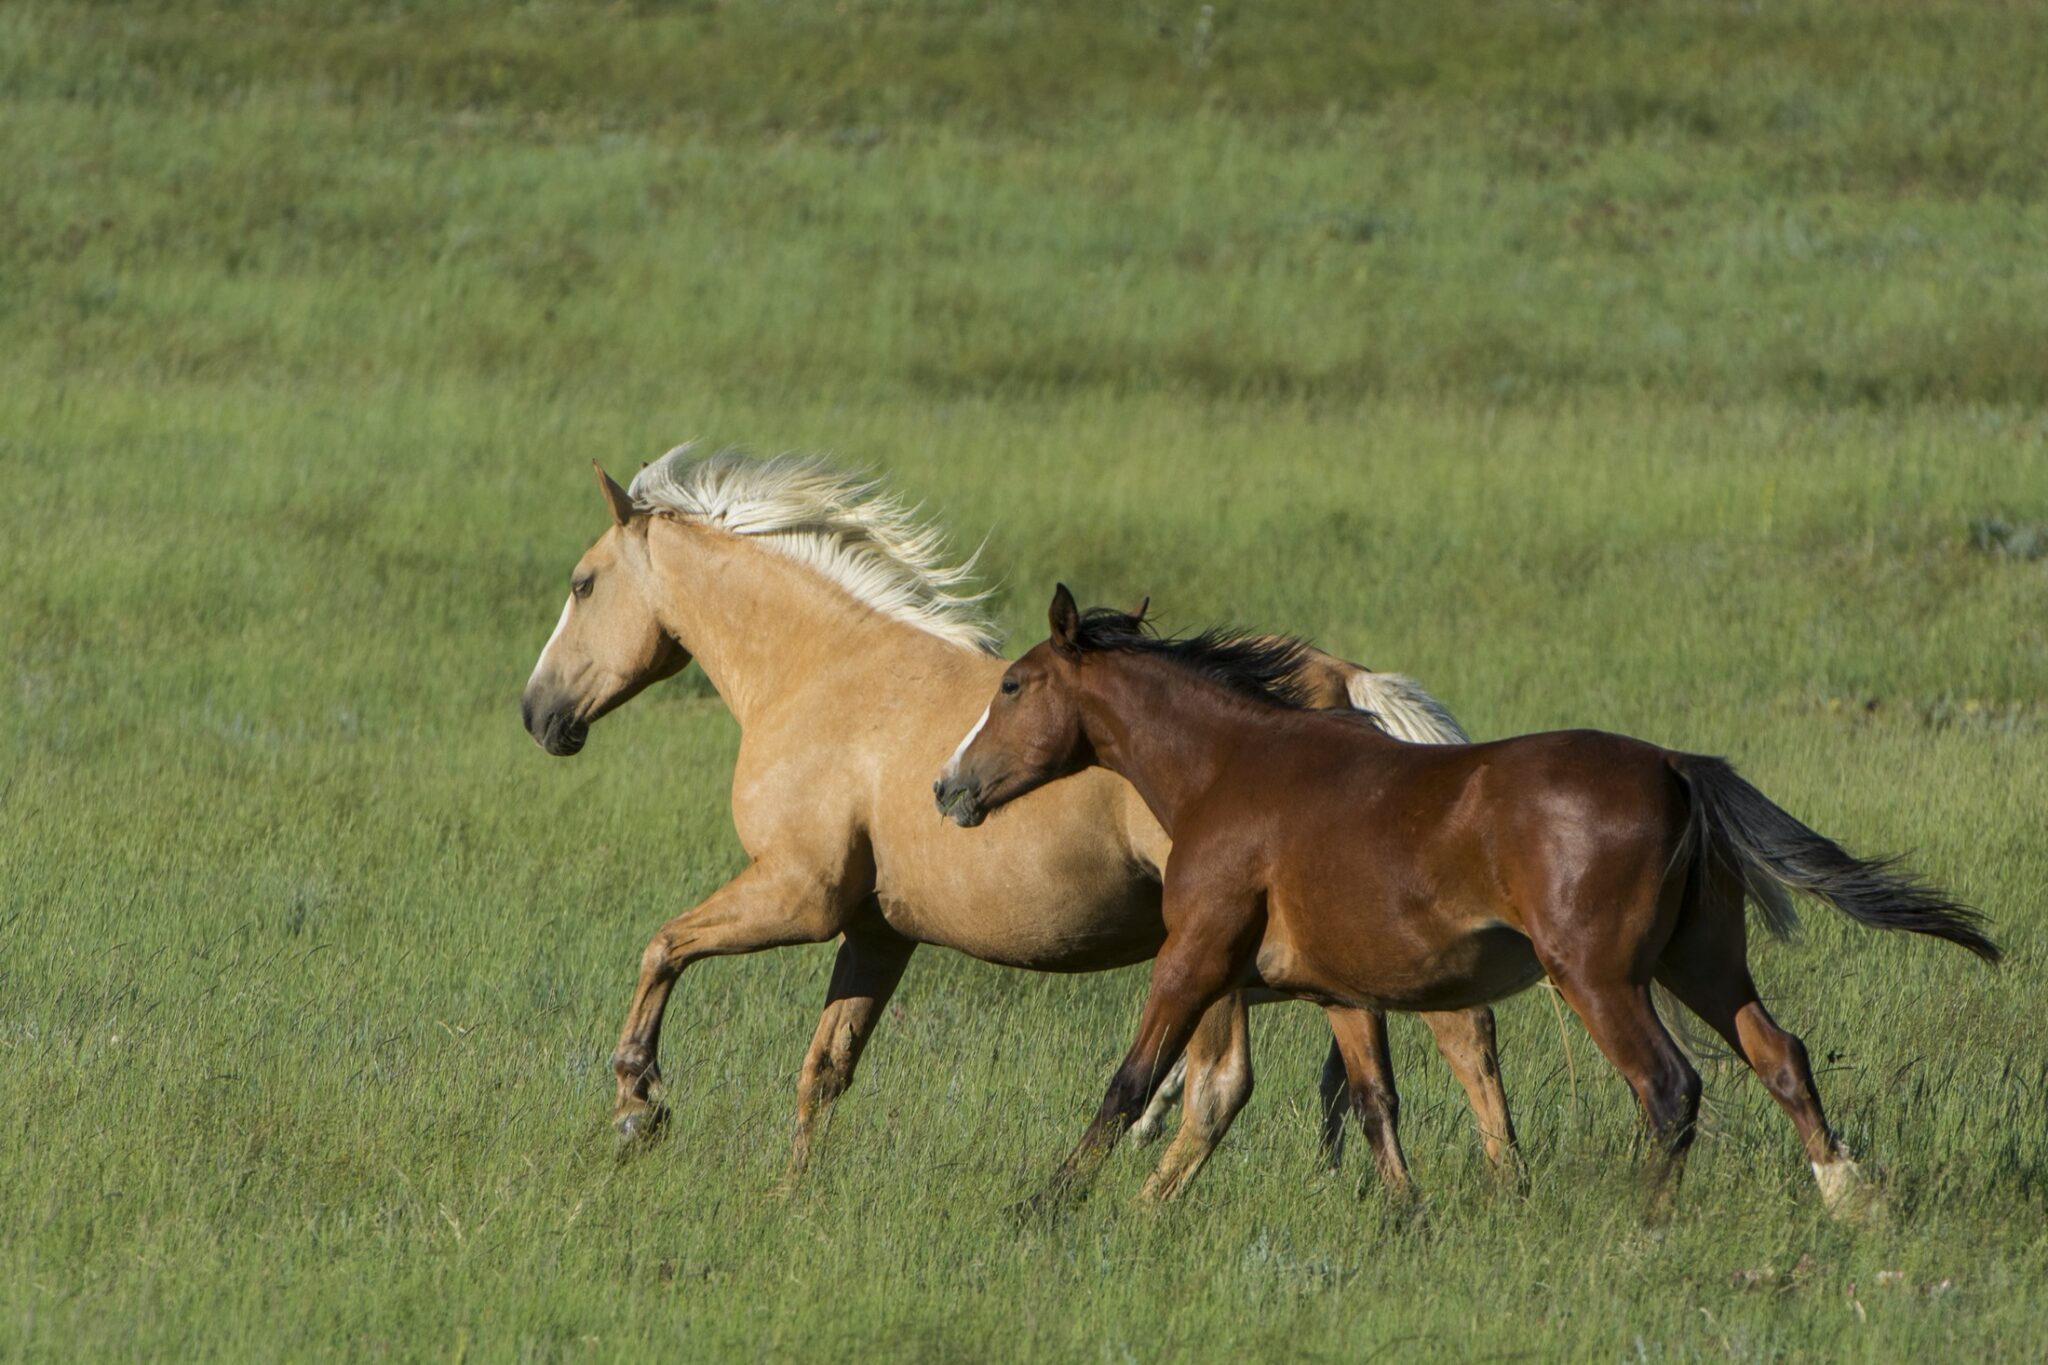 Two horses running together